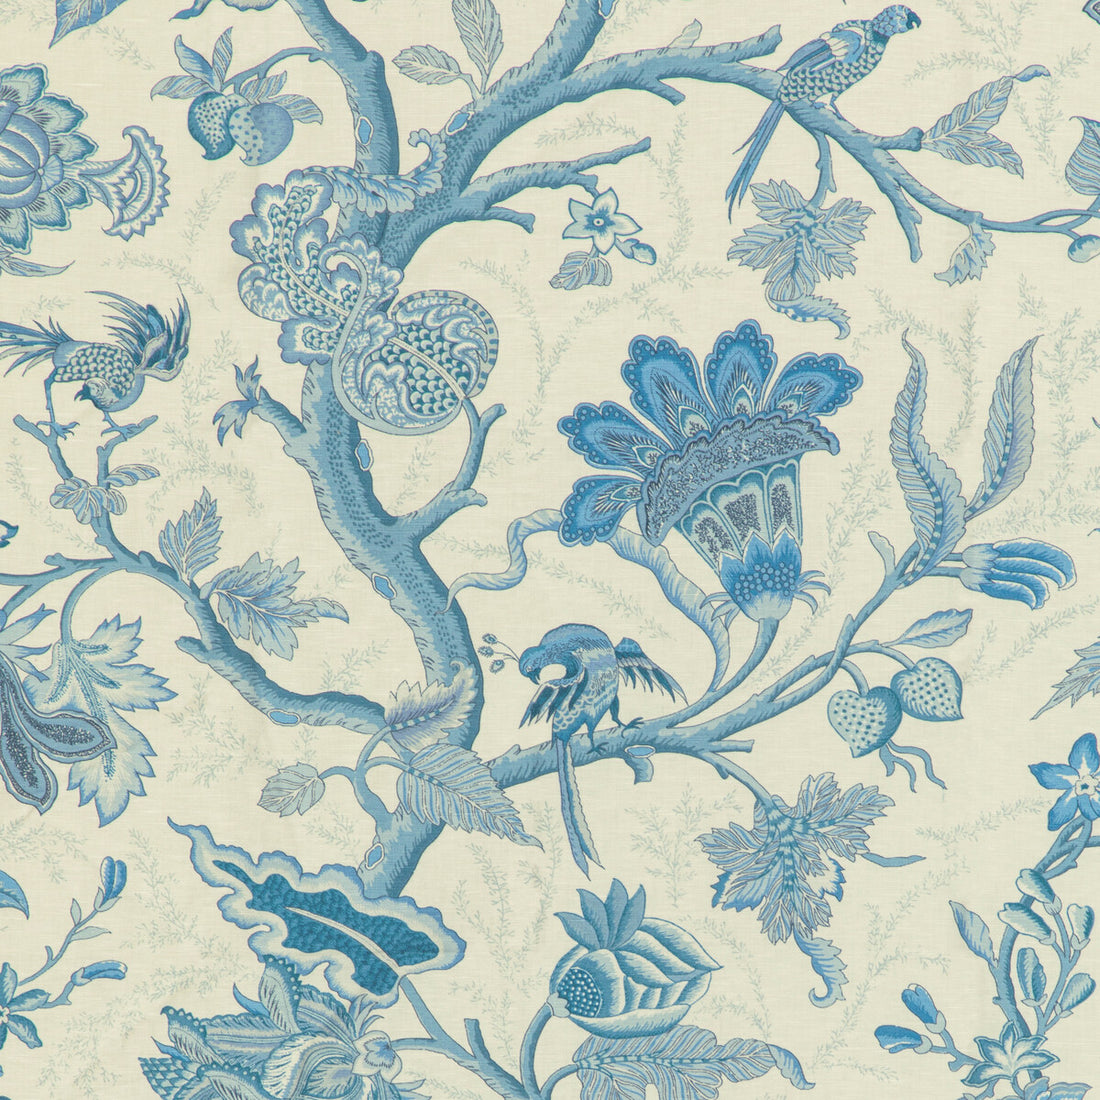 Louverne Print fabric in blue color - pattern 8020121.5.0 - by Brunschwig &amp; Fils in the Louverne collection